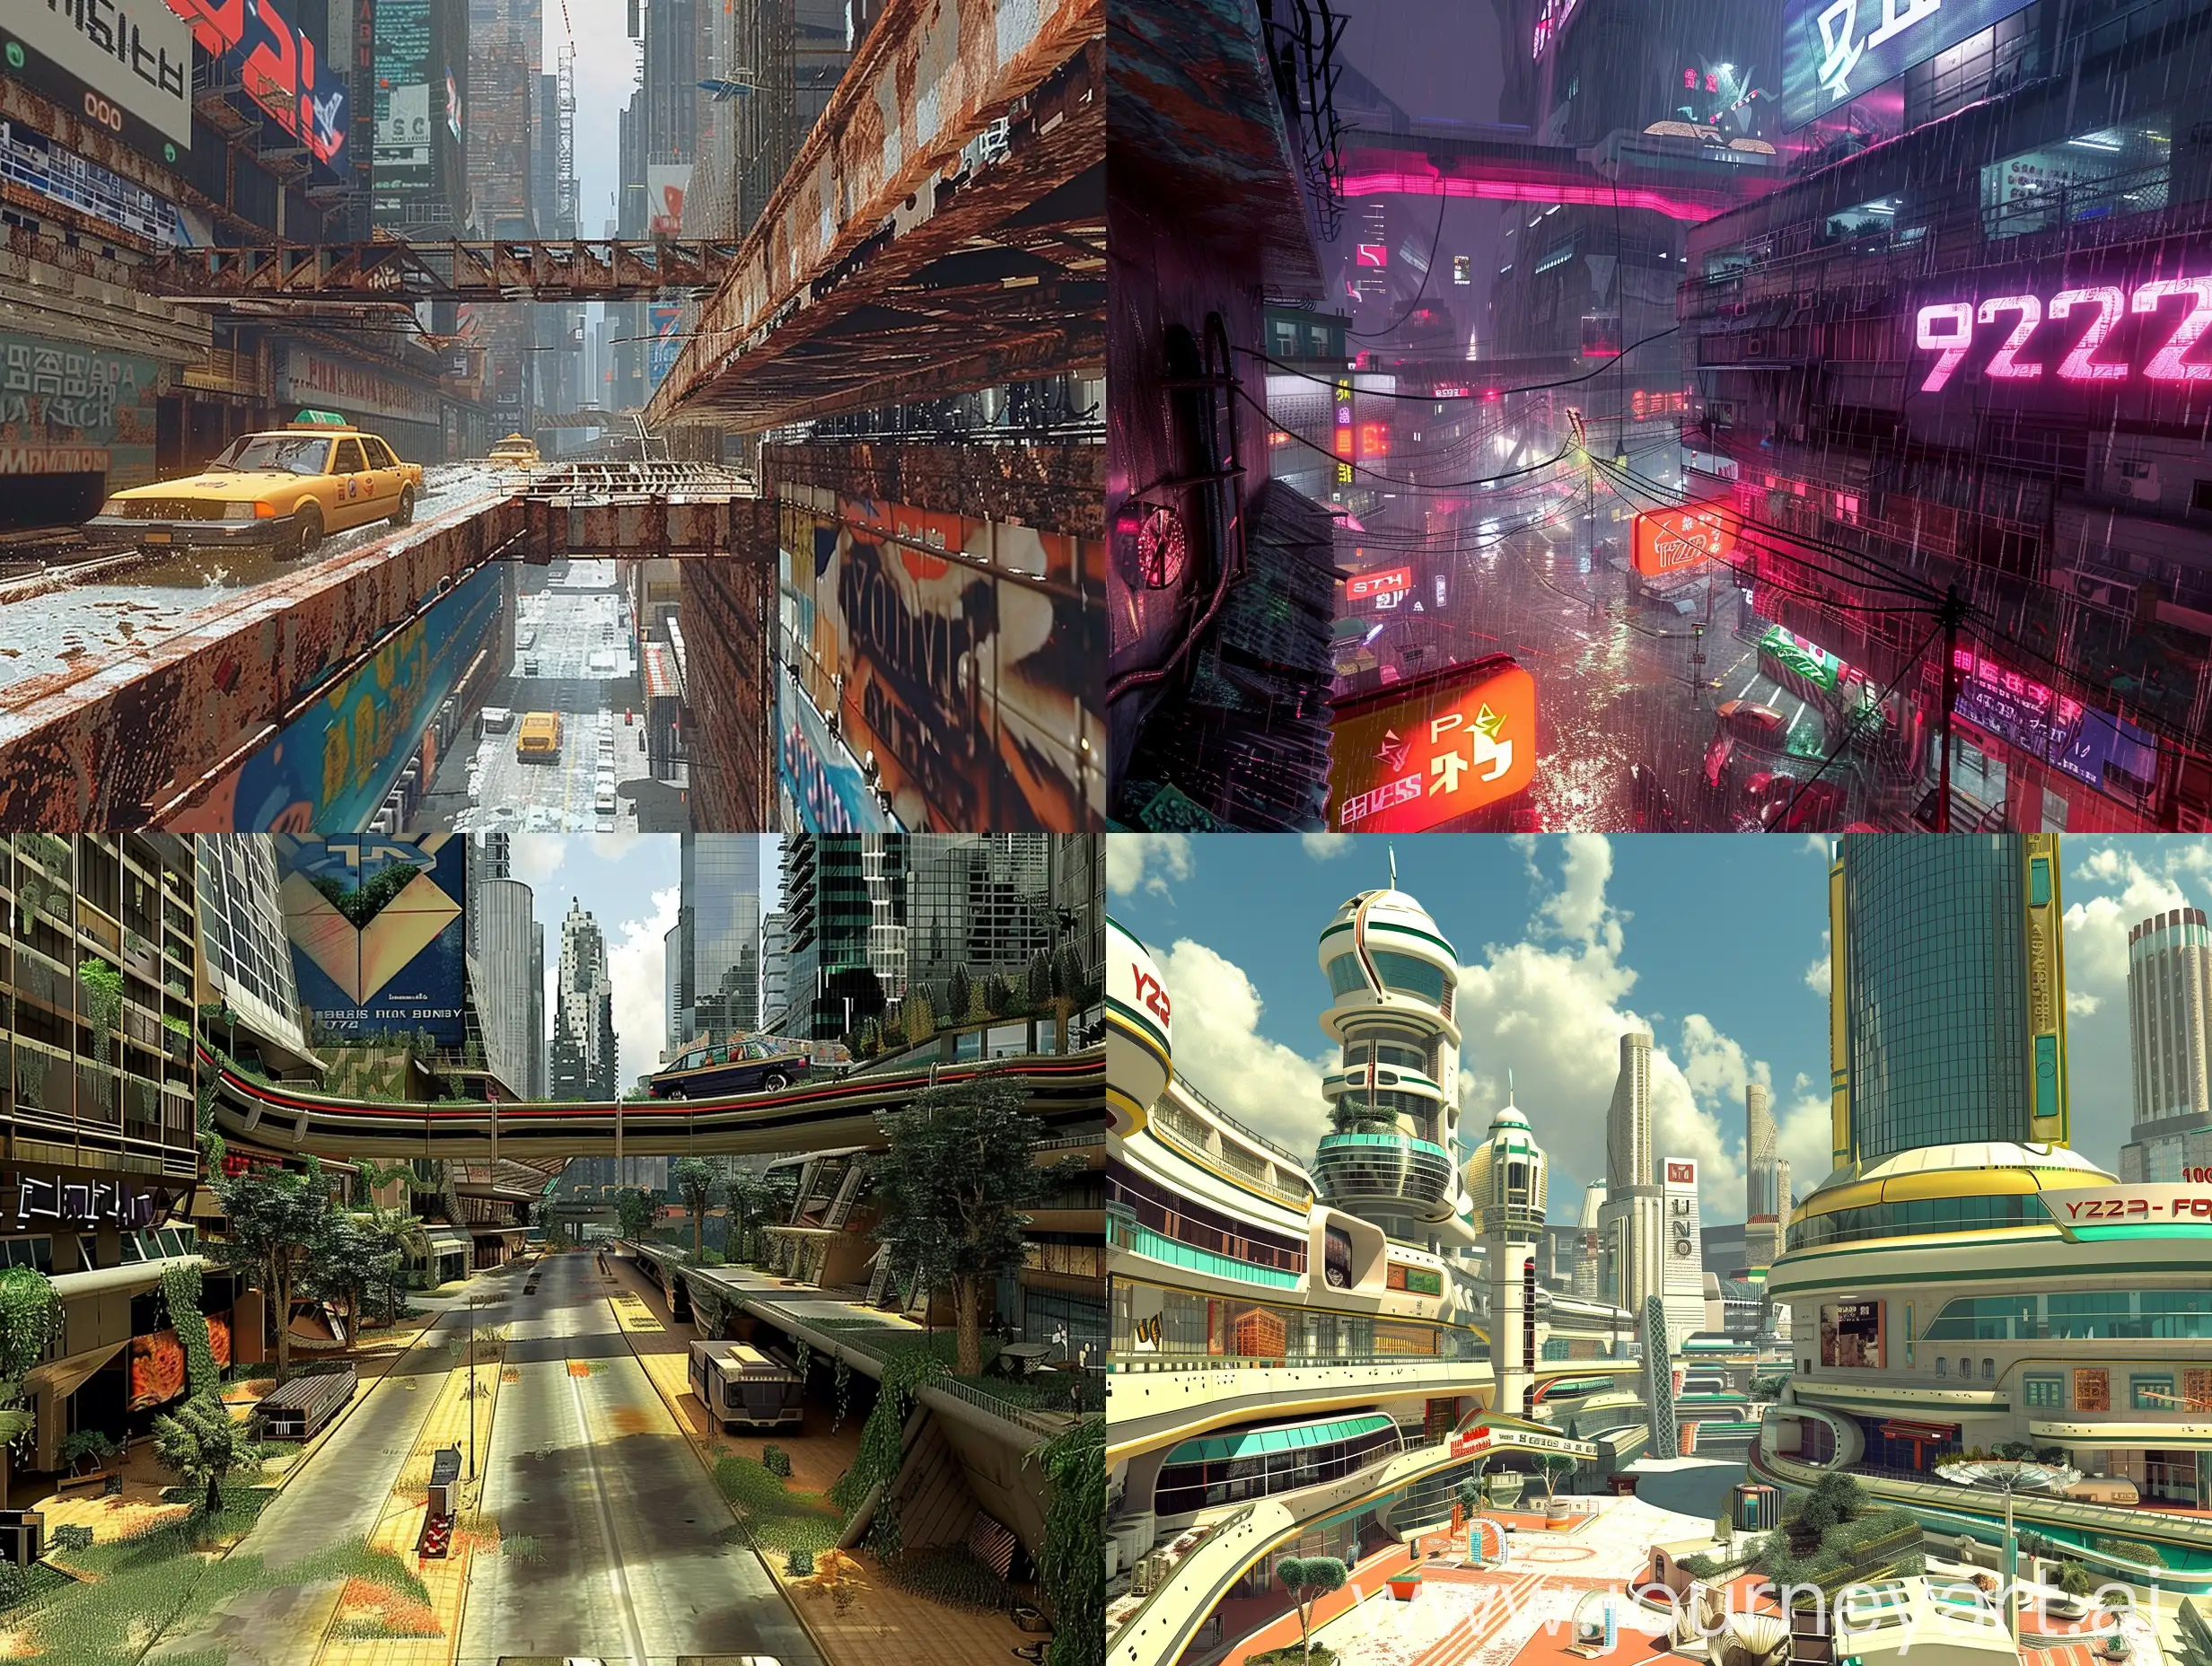  a city, genre, retro, modern, futurism, y2k aesthetic, nostalgic trend, environment, old PlayStation 2 video game, 2000s graphics, render, video game, old graphics,
